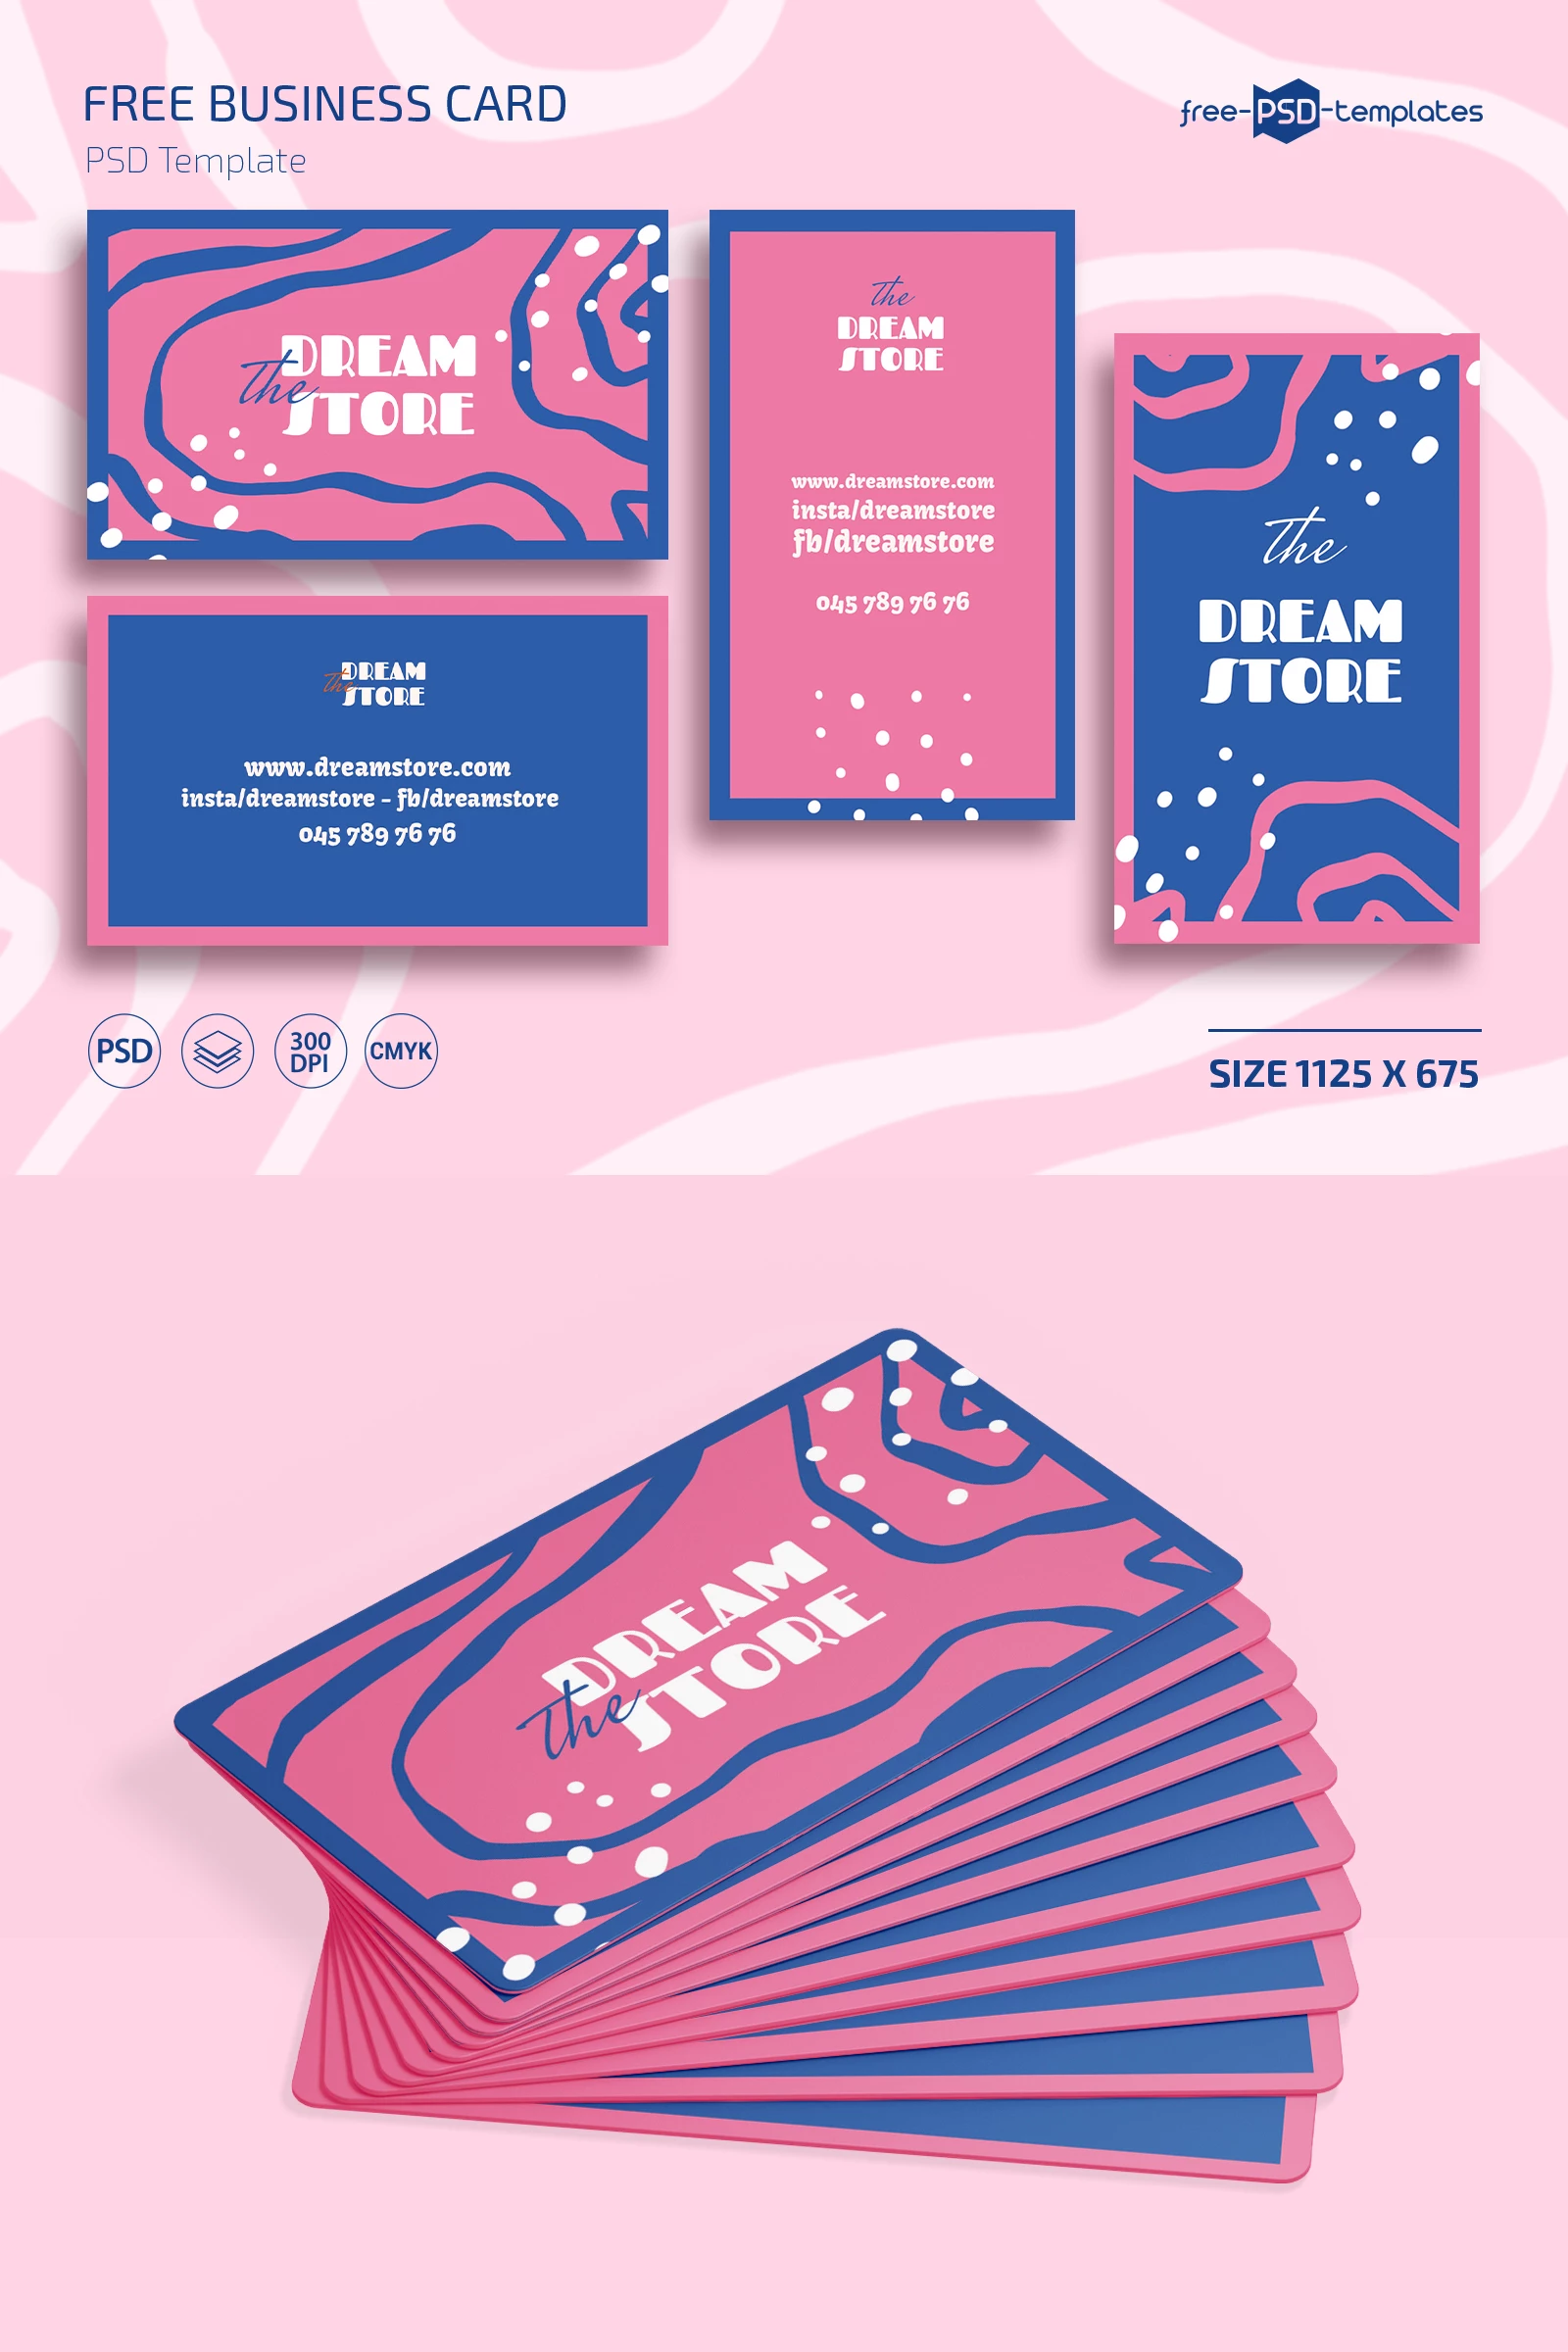 Free Business Card Template in PSD